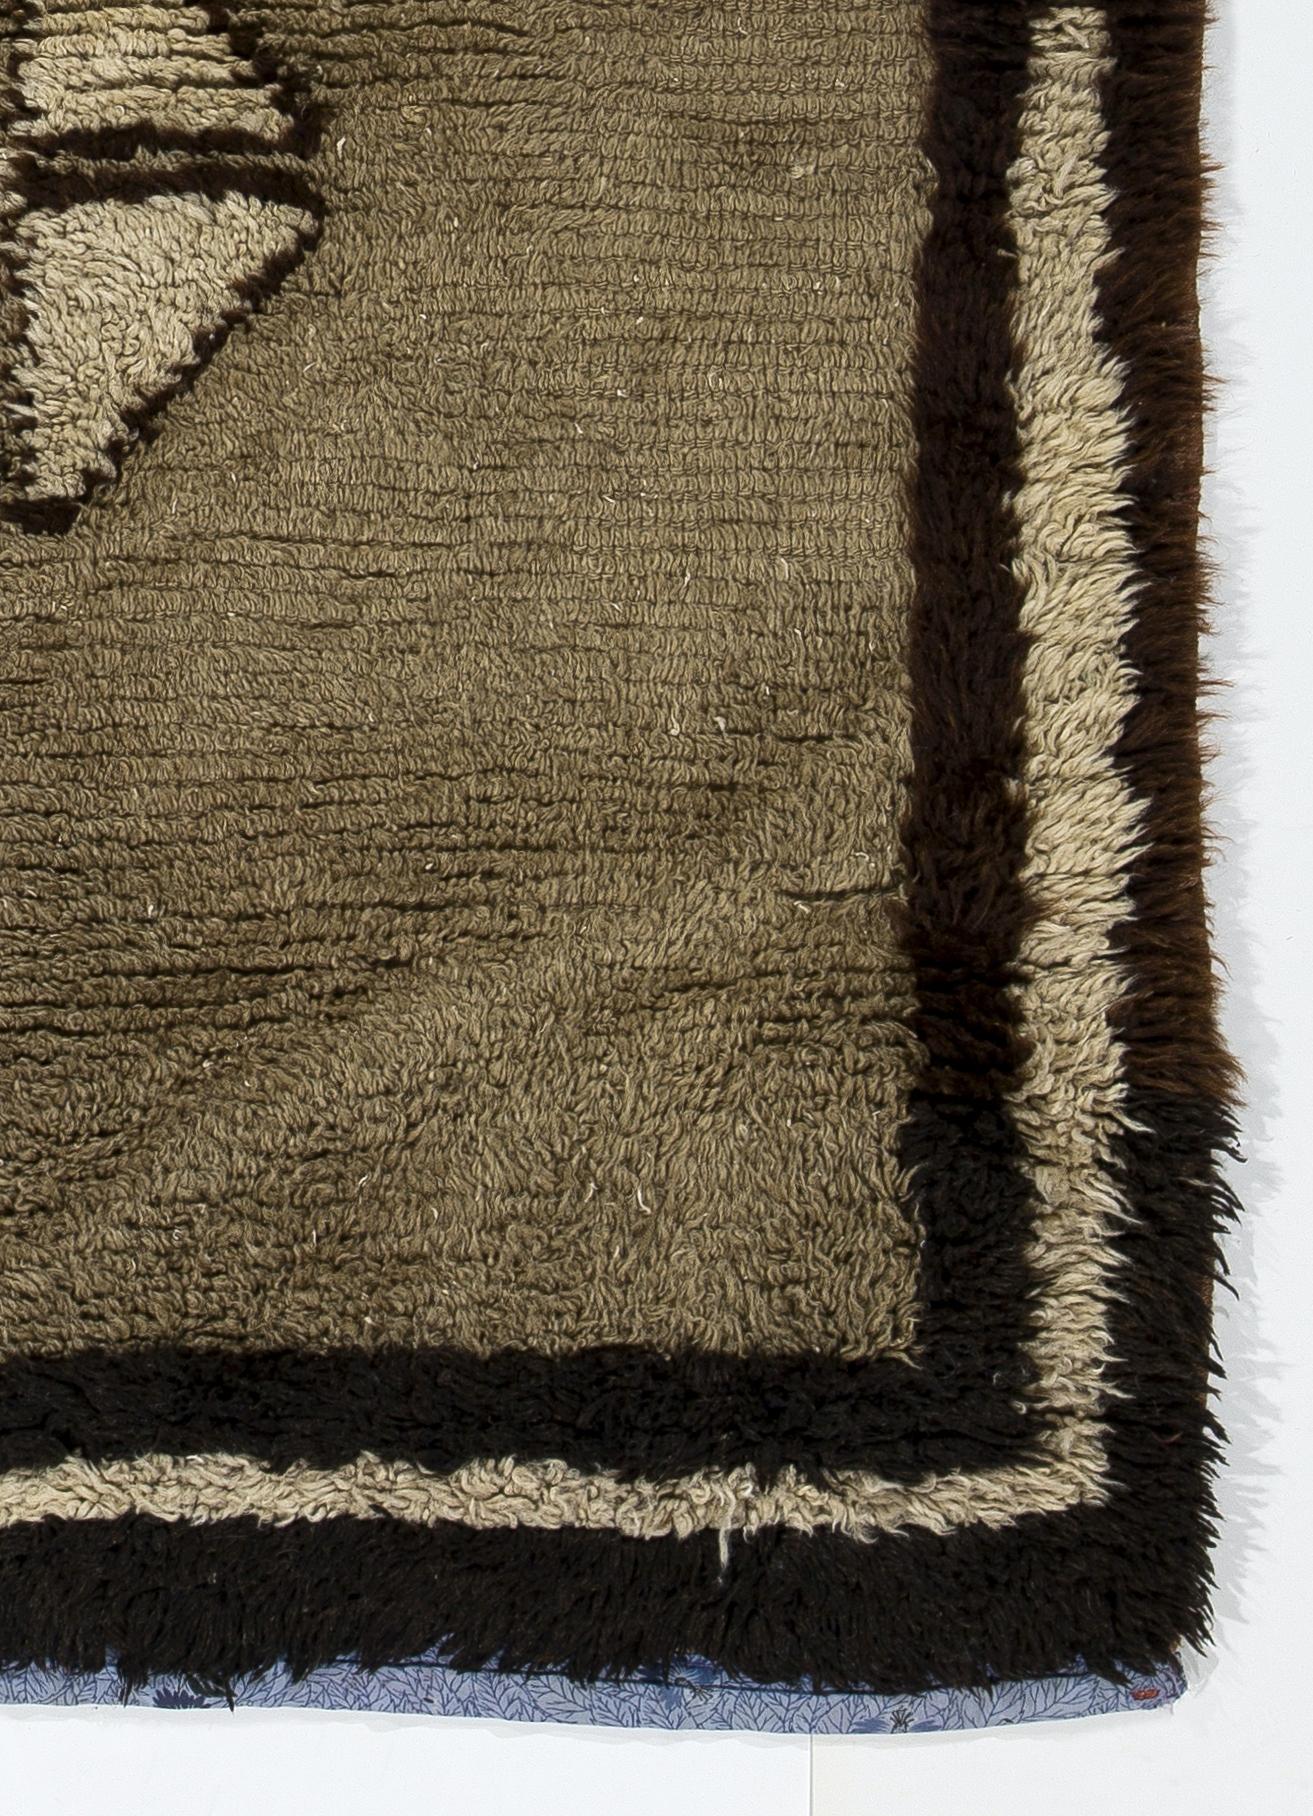 3.7x5 Ft Tulu Rug with a Four Leafed Clover. All Natural Gray, Brown, Beige Wool 1